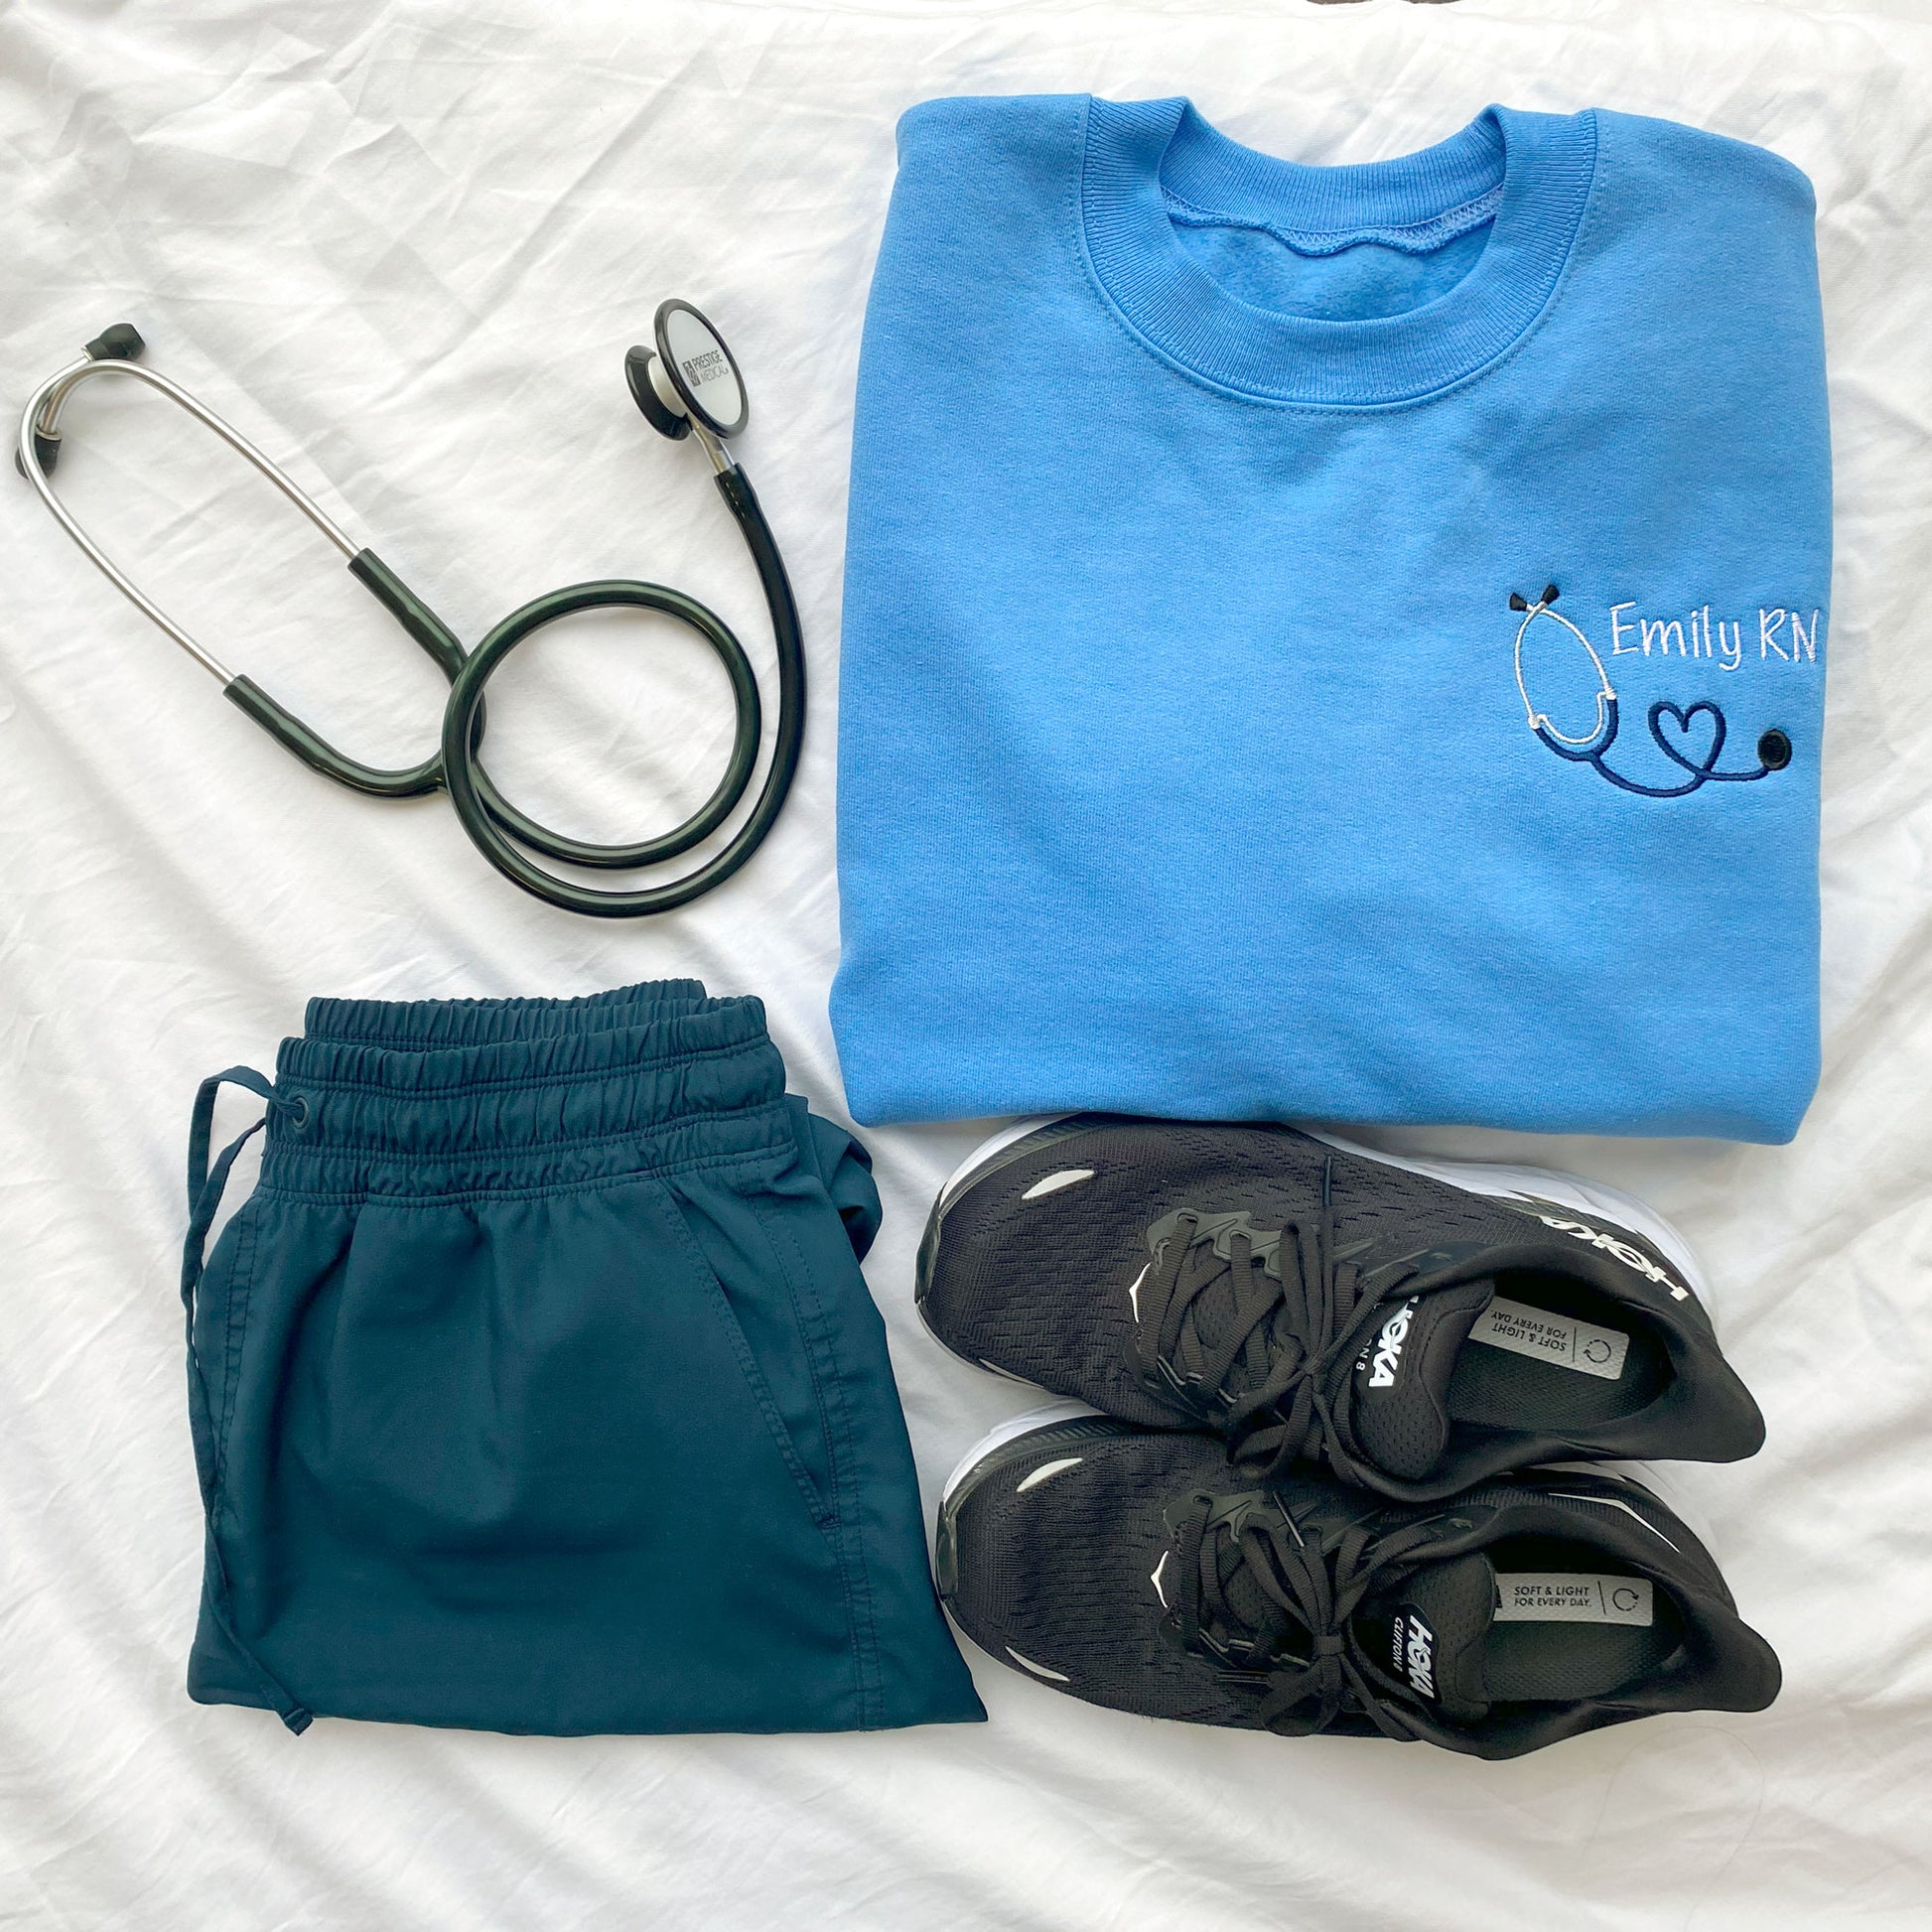 styled flat lay of a  Carolina blue crewneck sweatshirt with custom mini heart stethoscope design embroidered on the left chest in navy and white threads with navy scrubs, sneakers, and a stethoscope. 